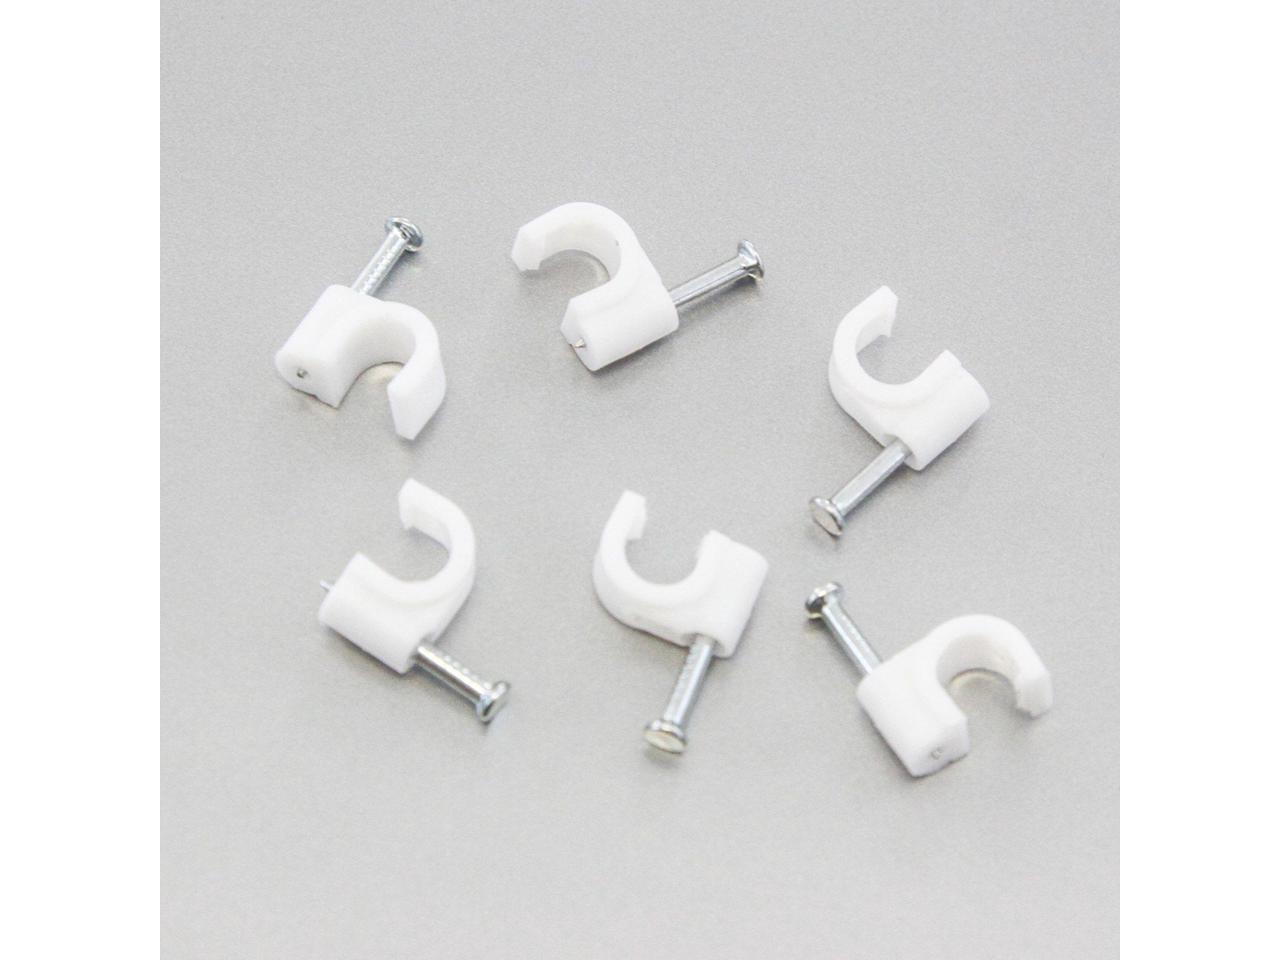 8 mm 200 Round 5/16" Cable Wire Clip Management Cord Tie Holder Nail In Clamps 